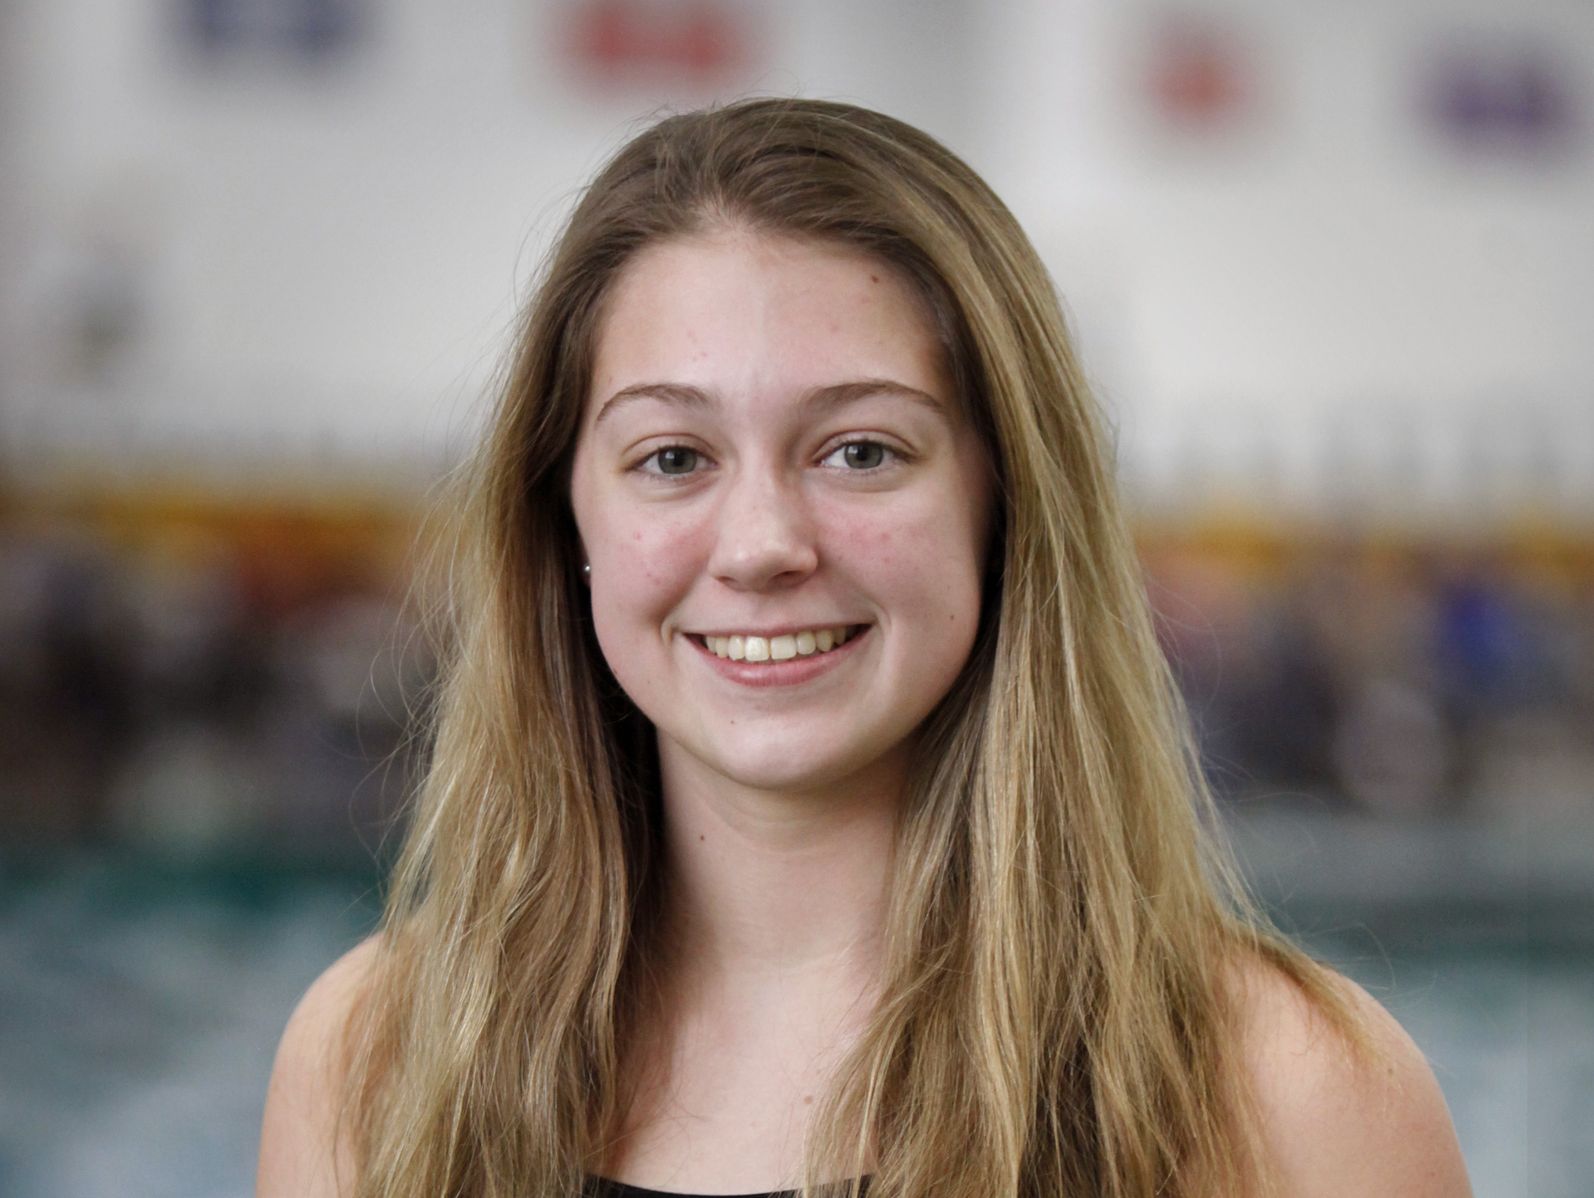 Floyd Central swimmer Lauren Thompson was voted the winner of the Courier-Journal Southern Indiana Athlete of the Week Award presented by Norton Sports Health.